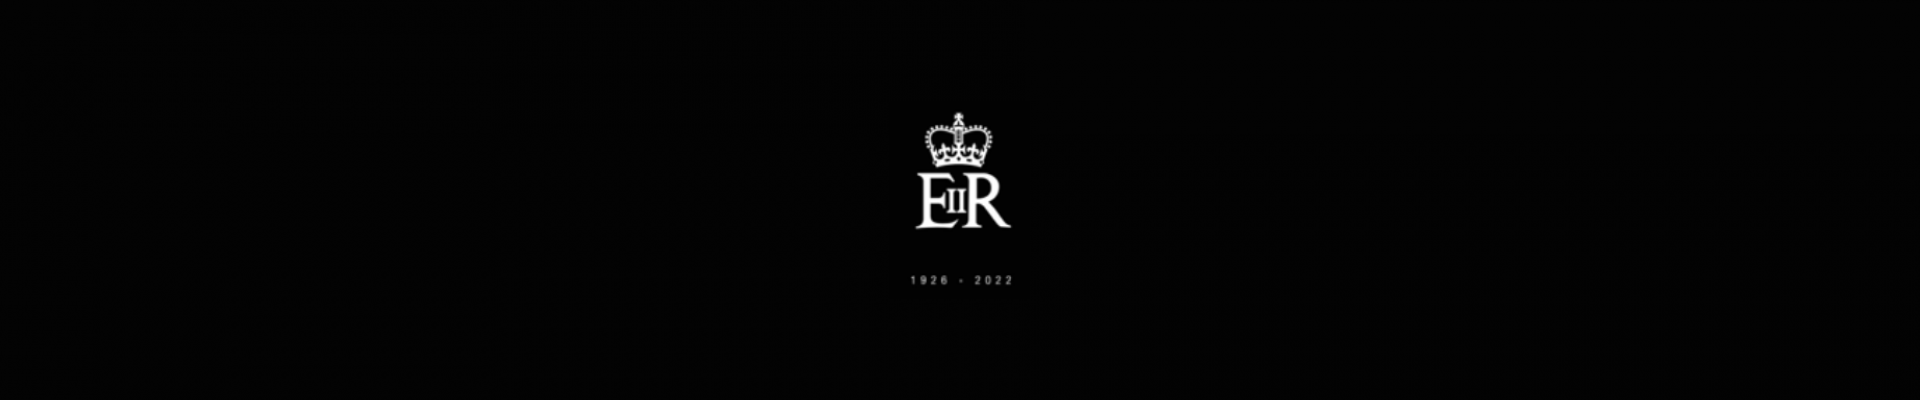 Black background with the initials of Queen Elizabeth II in the center